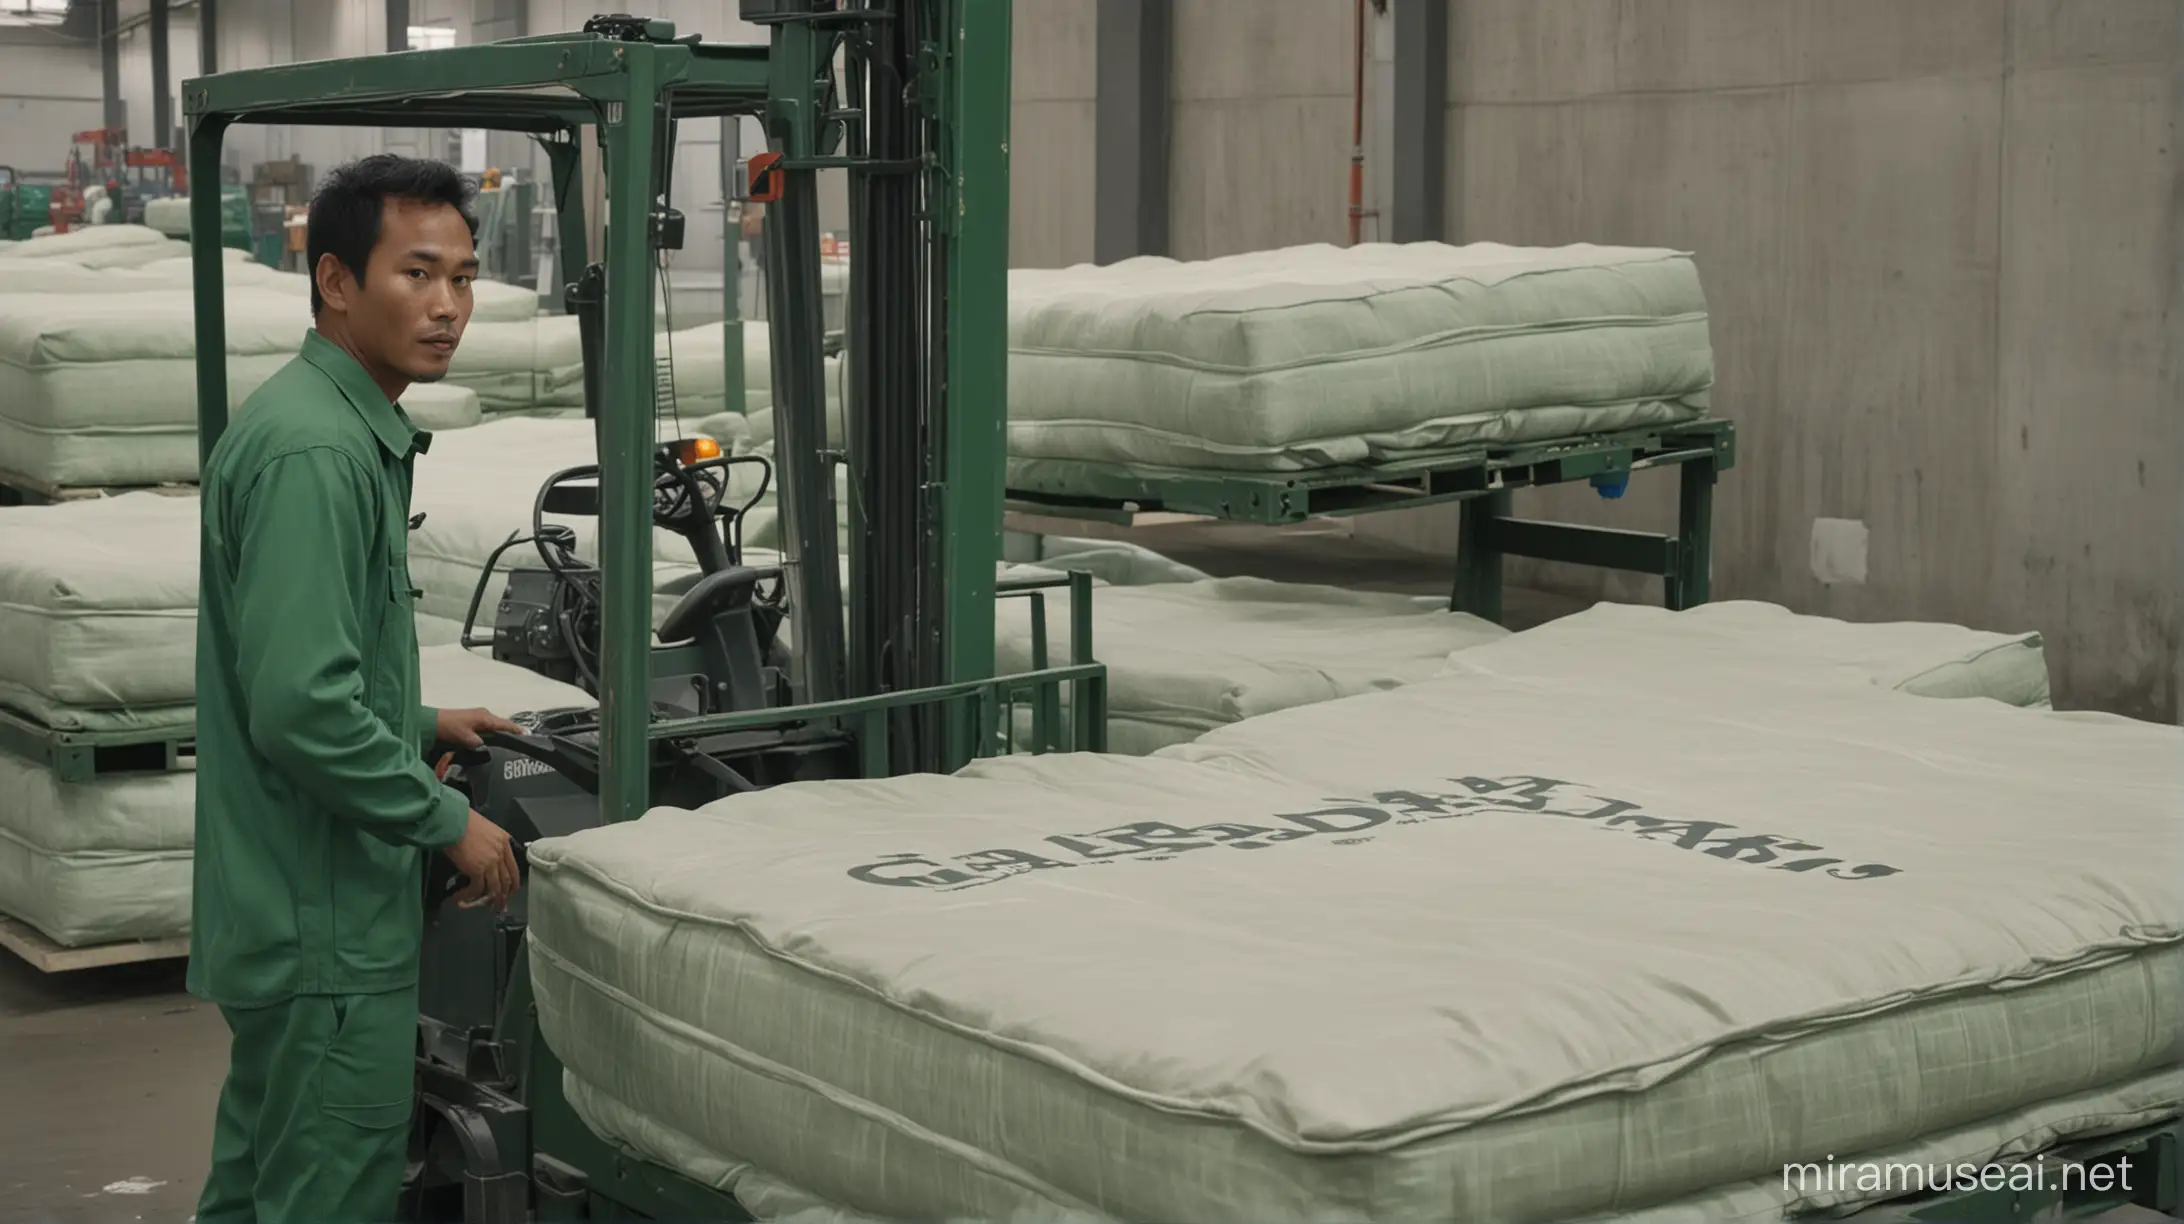 an Indonesian man, clean face, worker at a mattress factory, dressed in green with the words "GALADIZ", seen a lot of production activity, seen a forklift carrying a mattress, realistic, HD